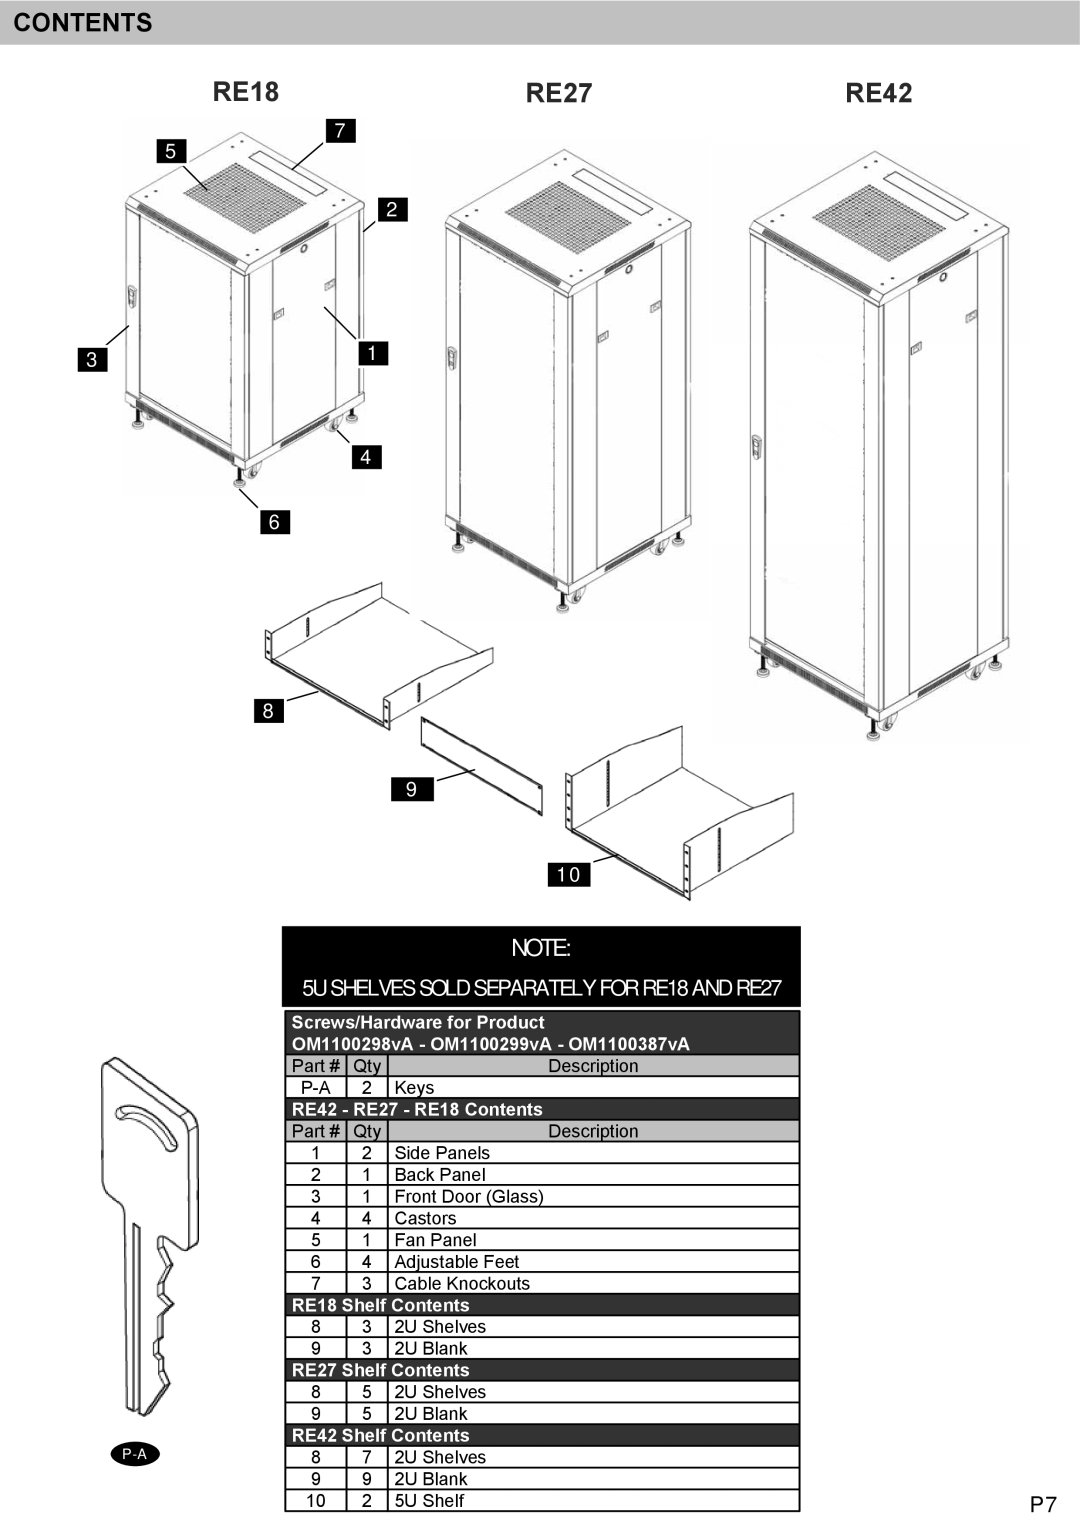 Omnimount RE27B instruction manual RE18RE27, RE42, 5U SHELVES SOLD SEPARATELY FOR RE18 AND RE27, RE27 - RE18 Contents 